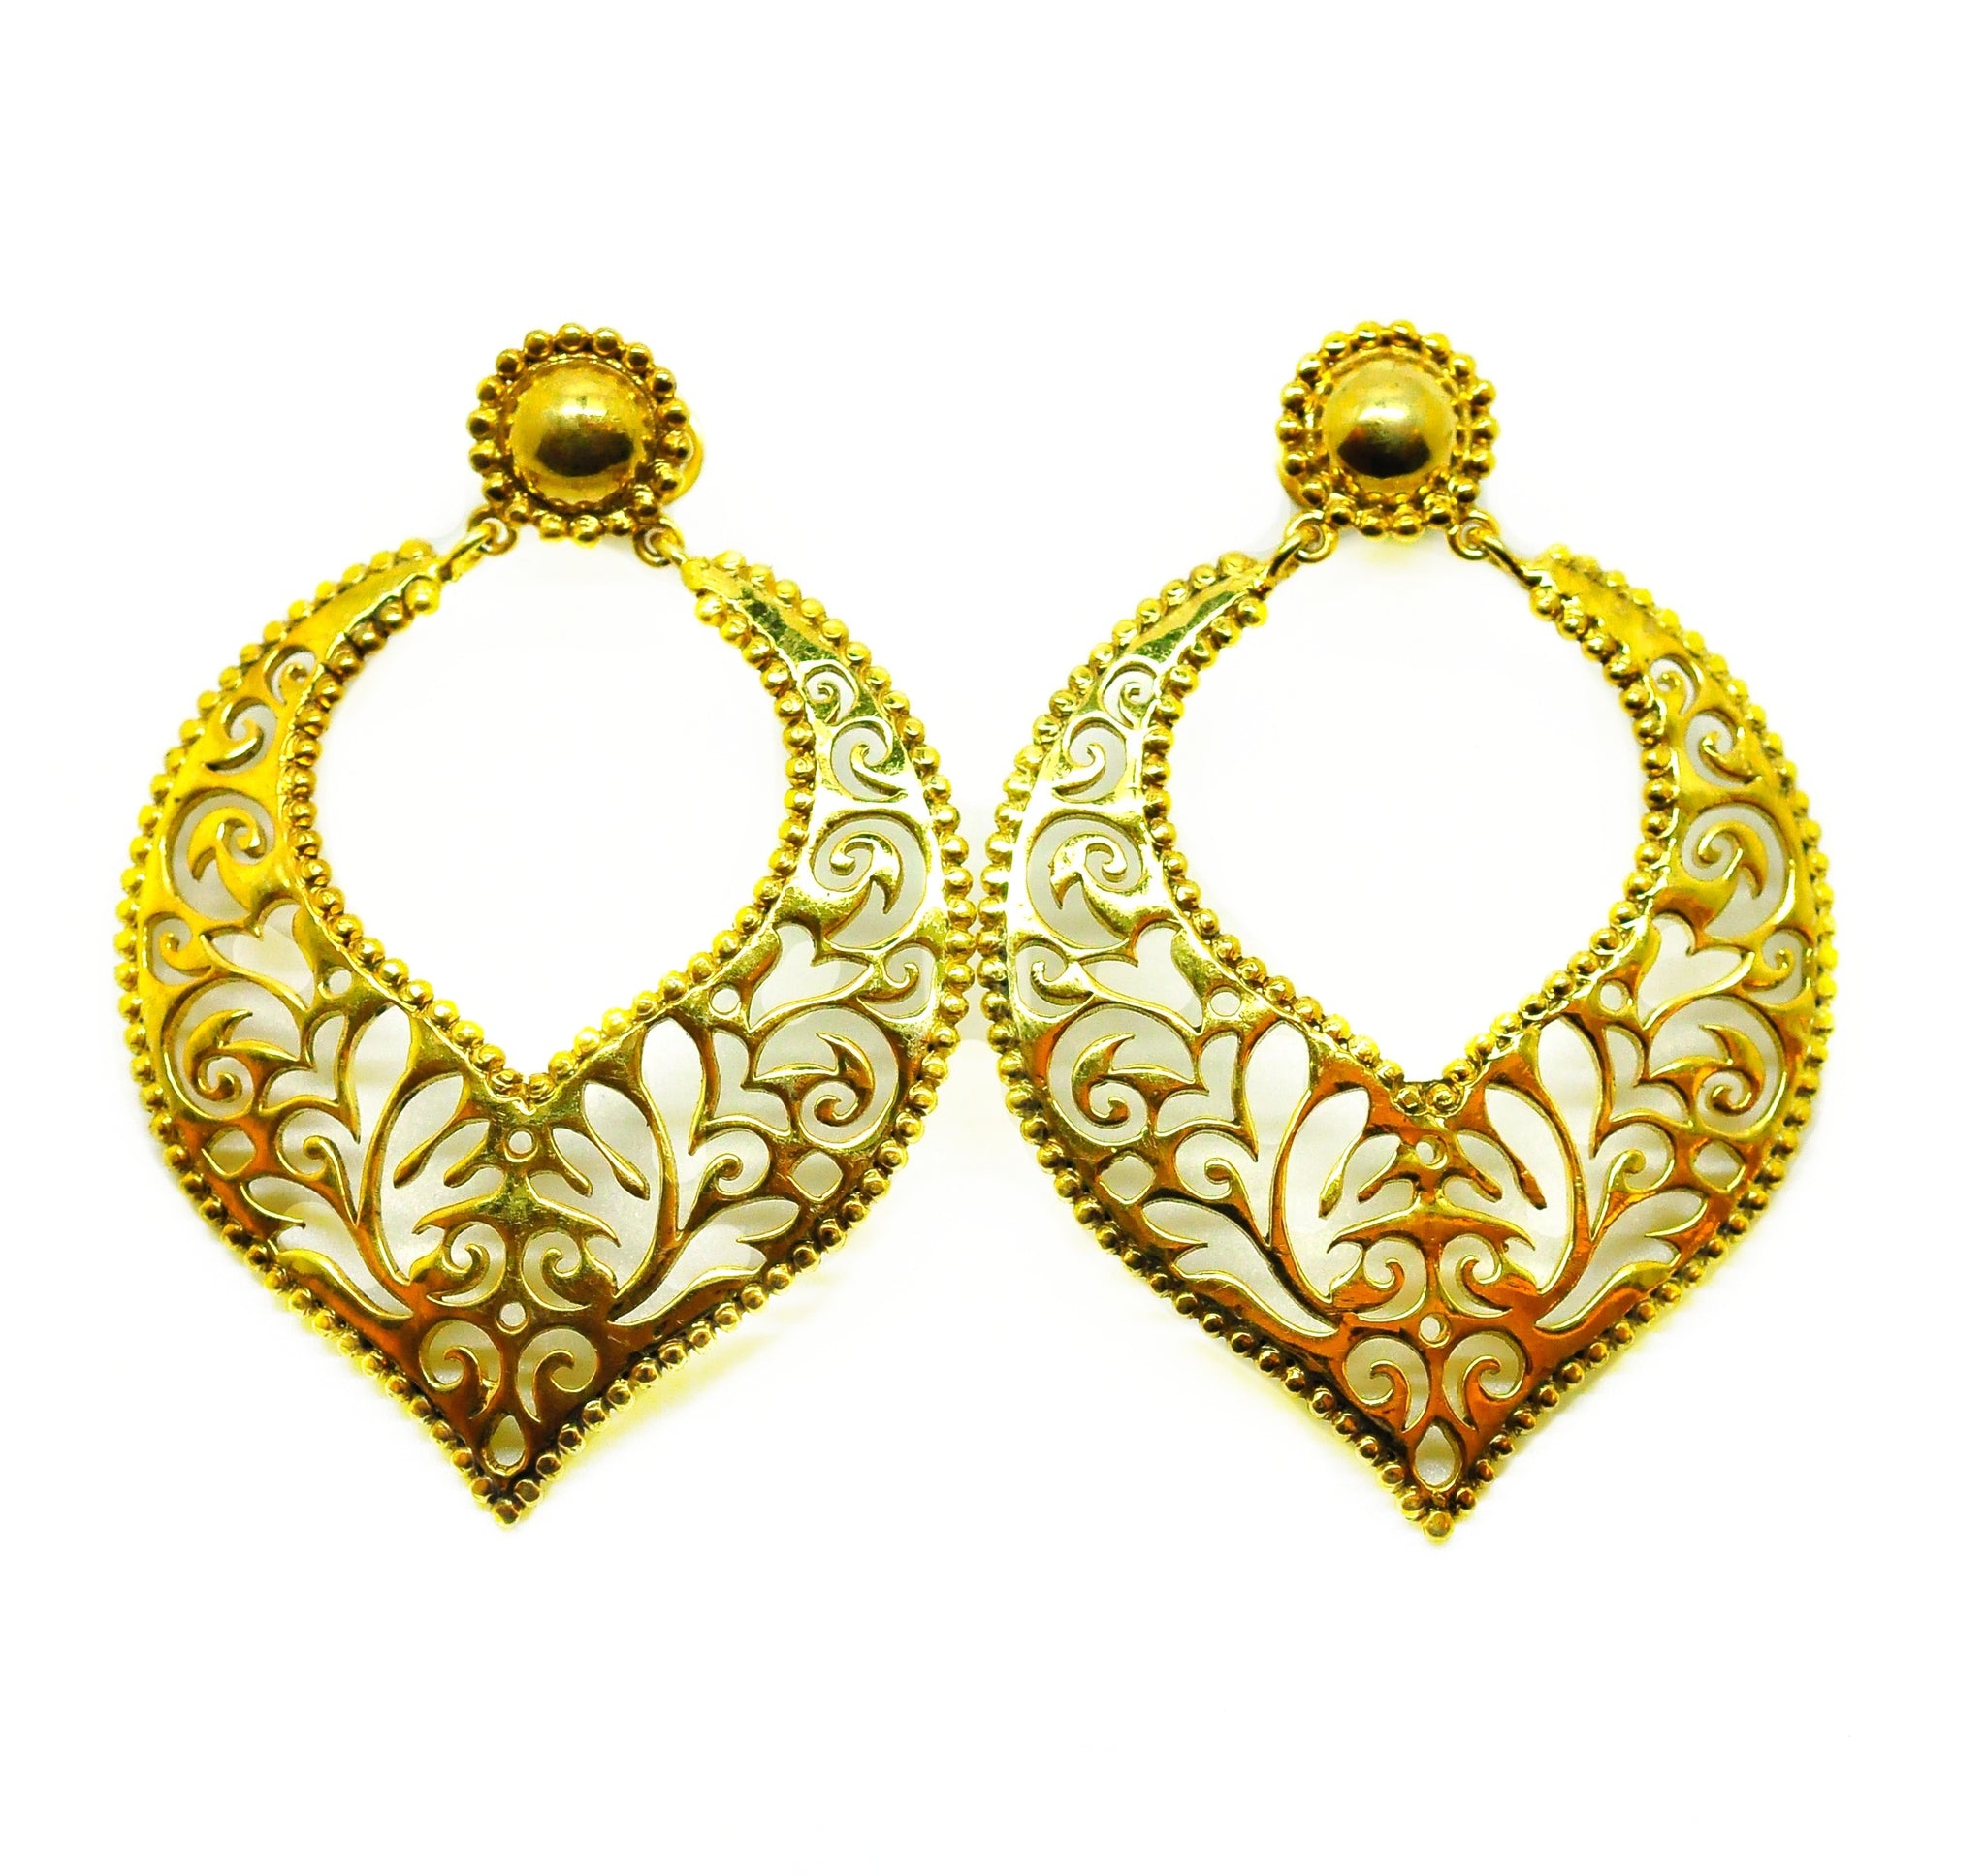 SOLD - New Indian filigree 5 -Gold